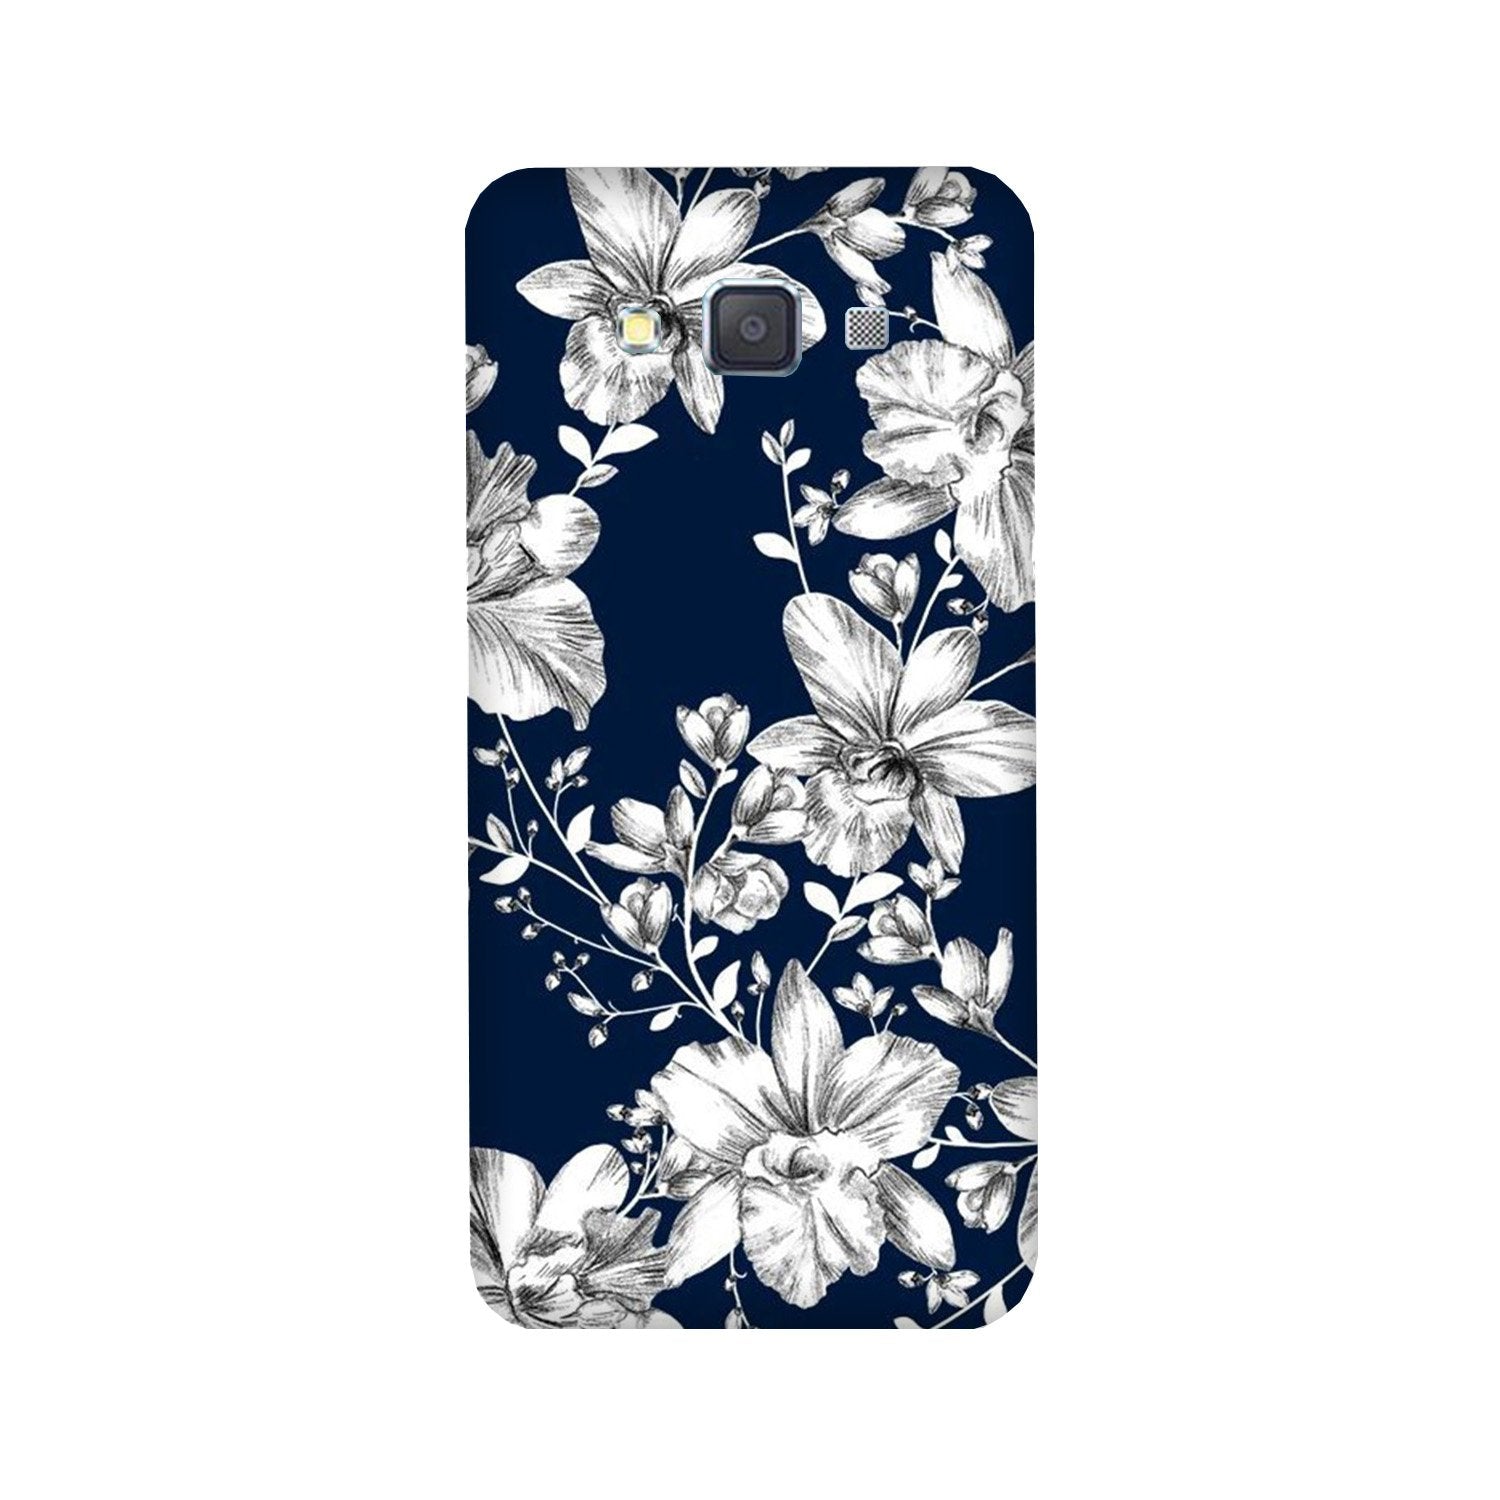 White flowers Blue Background Case for Galaxy J7 (2016)